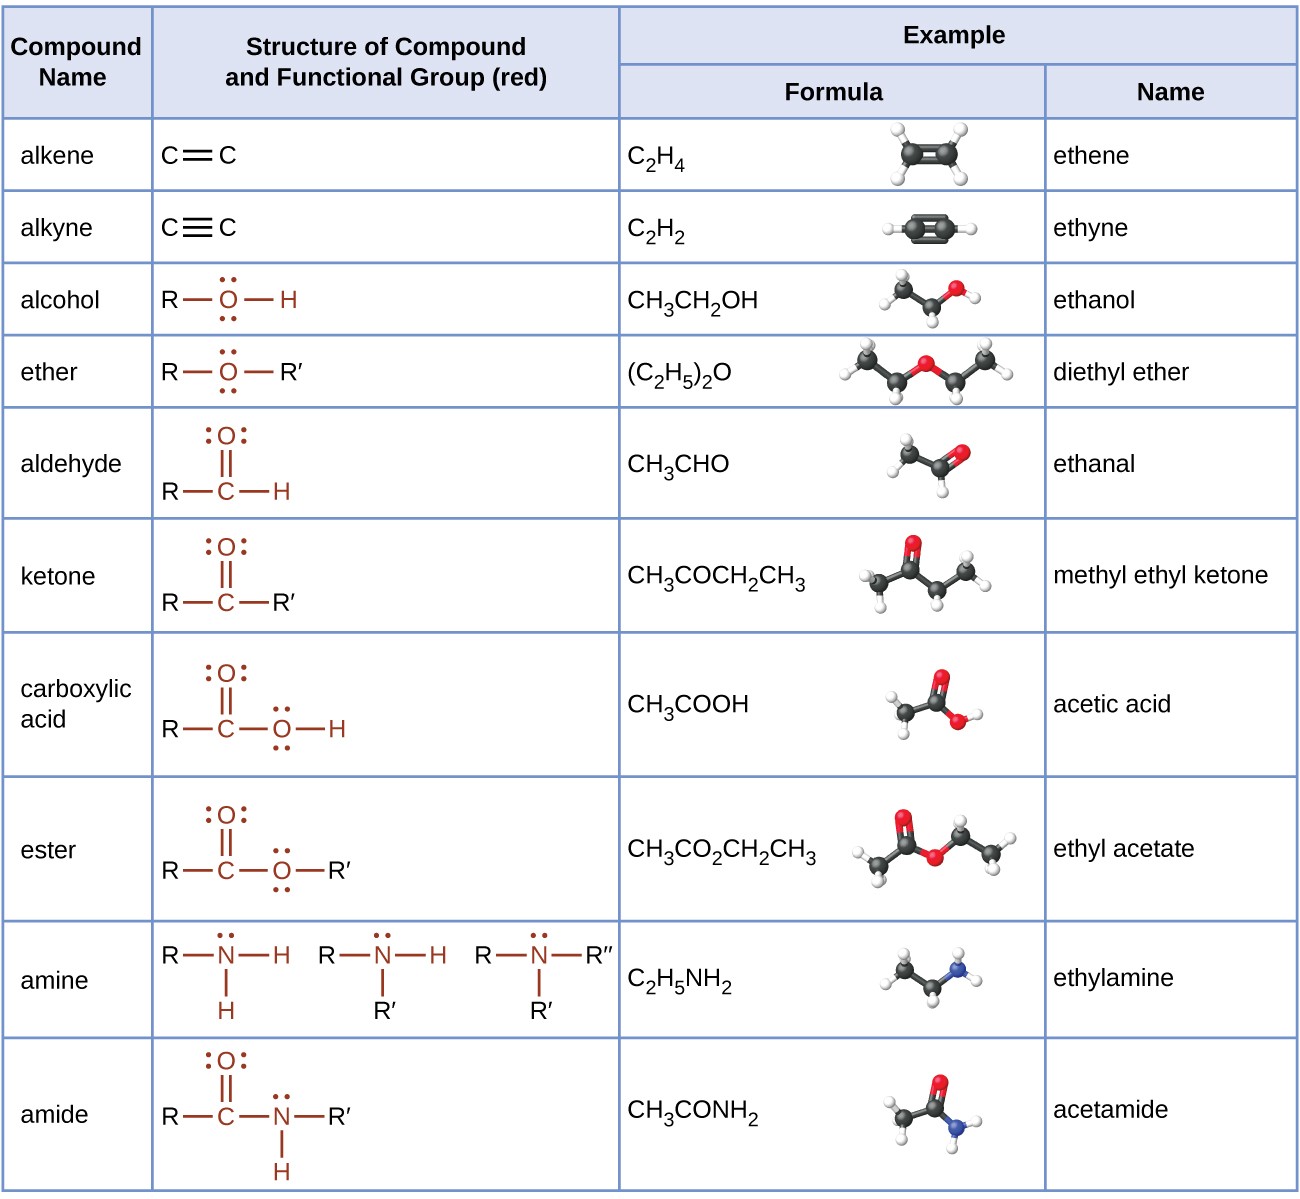 This table provides compound names, structures with functional groups in red, and examples that include formulas, structural formulas, ball-and-stick models, and names. Compound names include alkene, alkyne, alcohol, ether, aldehyde, ketone, carboxylic acid, ester, amine, and amide. Alkenes have a double bond. A formula is C subscript 2 H subscript 4 which is named ethene. The ball-and-stick model shows two black balls forming a double bond and each is bonded to two white balls. Alkynes have a triple bond. A formula is C subscript 2 H subscript 2 which is named ethyne. The ball-and-stick model shows two black balls with a triple bond between them each bonded to one white ball. Alcohols have an O H group. The O has two pairs of electron dots. A formula is C H subscript 3 C H subscript 2 O H which is named ethanol. The ball-and-stick model shows two black balls and one red ball bonded to each other with a single bond. There are four white balls visible. Ethers have an O atom in the structure between two R groups. The O atom has two sets of electron dots. A formula is ( C subscript 2 H subscript 5 ) subscript 2 O which is named ethanal. The ball-and-stick model shows two black balls bonded to a red ball which is bonded to two more black balls. All bonds are single. There are five white balls visible. Aldehydes have a C atom to which a double bonded O and an H and an R are included in the structure. The O atom has two sets of electron dots. A formula is C H subscript 3 C H O which is named Ethanal. The ball-and-stick model shows two black bonds bonded to two red balls. The ball-and-stick model shows two black balls bonded with a single bond and the second black ball forms a double bond with a red ball. There are three white balls visible. Ketones show a C atom to which a double bonded O is attached. The left side of the C atom is bonded to R and the right side is bonded to R prime. The O atom as two sets of electron dots. The formula is C H subscript 3 C O C H subscript 2 C H subscript 3 and is named methyl ethyl ketone. The ball-and-stick models shows four black balls all forming single bonds with each other. The second black ball forms a double bond with a red ball. There are five white balls visible. Carboxylic acids have a C to which a double bonded O and an O H are included in the structure. Each O atom has two sets of electron dots. A formula is C H subscript 3 C O O H which is named ethanoic or acetic acid. The ball-and-stick model shows two black balls and one red ball forming single bonds with each other. The second black ball also forms a double bond with another red ball. Three white balls are visible. Esters have a C atom which forms a double bond with an O atom and single bond with another O atom which has an attached hydrocarbon group in the structure. Each O atom has two sets of electron dots. A formula is C H subscript 3 C O subscript 2 C H subscript 2 C H subscript 3 which is named ethyl acetate. The ball-and-stick model shows two black balls, a red ball, and two more black balls forming single bonds with each other. The second black ball forms a double bond with another red ball. There are five white balls visible. Amines have an N atom in the structure to which three hydrocarbon groups, two hydrocarbon groups and one H atom, or one hydrocarbon group and two H atoms may be bonded. Each n has a single set of electron dots. A formula is C subscript 2 H subscript 5 N H subscript 2 which is named ethylamine. The ball-and-stick model shows two black balls and one blue ball forming single bonds with each other. There are five white balls visible. Amides have a C to which a double bonded O and single N incorporated in a structure between two hydrocarbon groups. One hydrocarbon group is bonded to the C, the other to the N. Amides can also have a H atom bonded to the N. The O atom as two sets of electron dots, and the N atom has one set. A formula is C H subscript 3 C O N H subscript 2 which is named ethanamide or acetamide. The ball-and-stick model shows two black balls and one blue ball forming single bonds with each other. The second black ball forms a double bond with one red ball. There are four white balls visible.